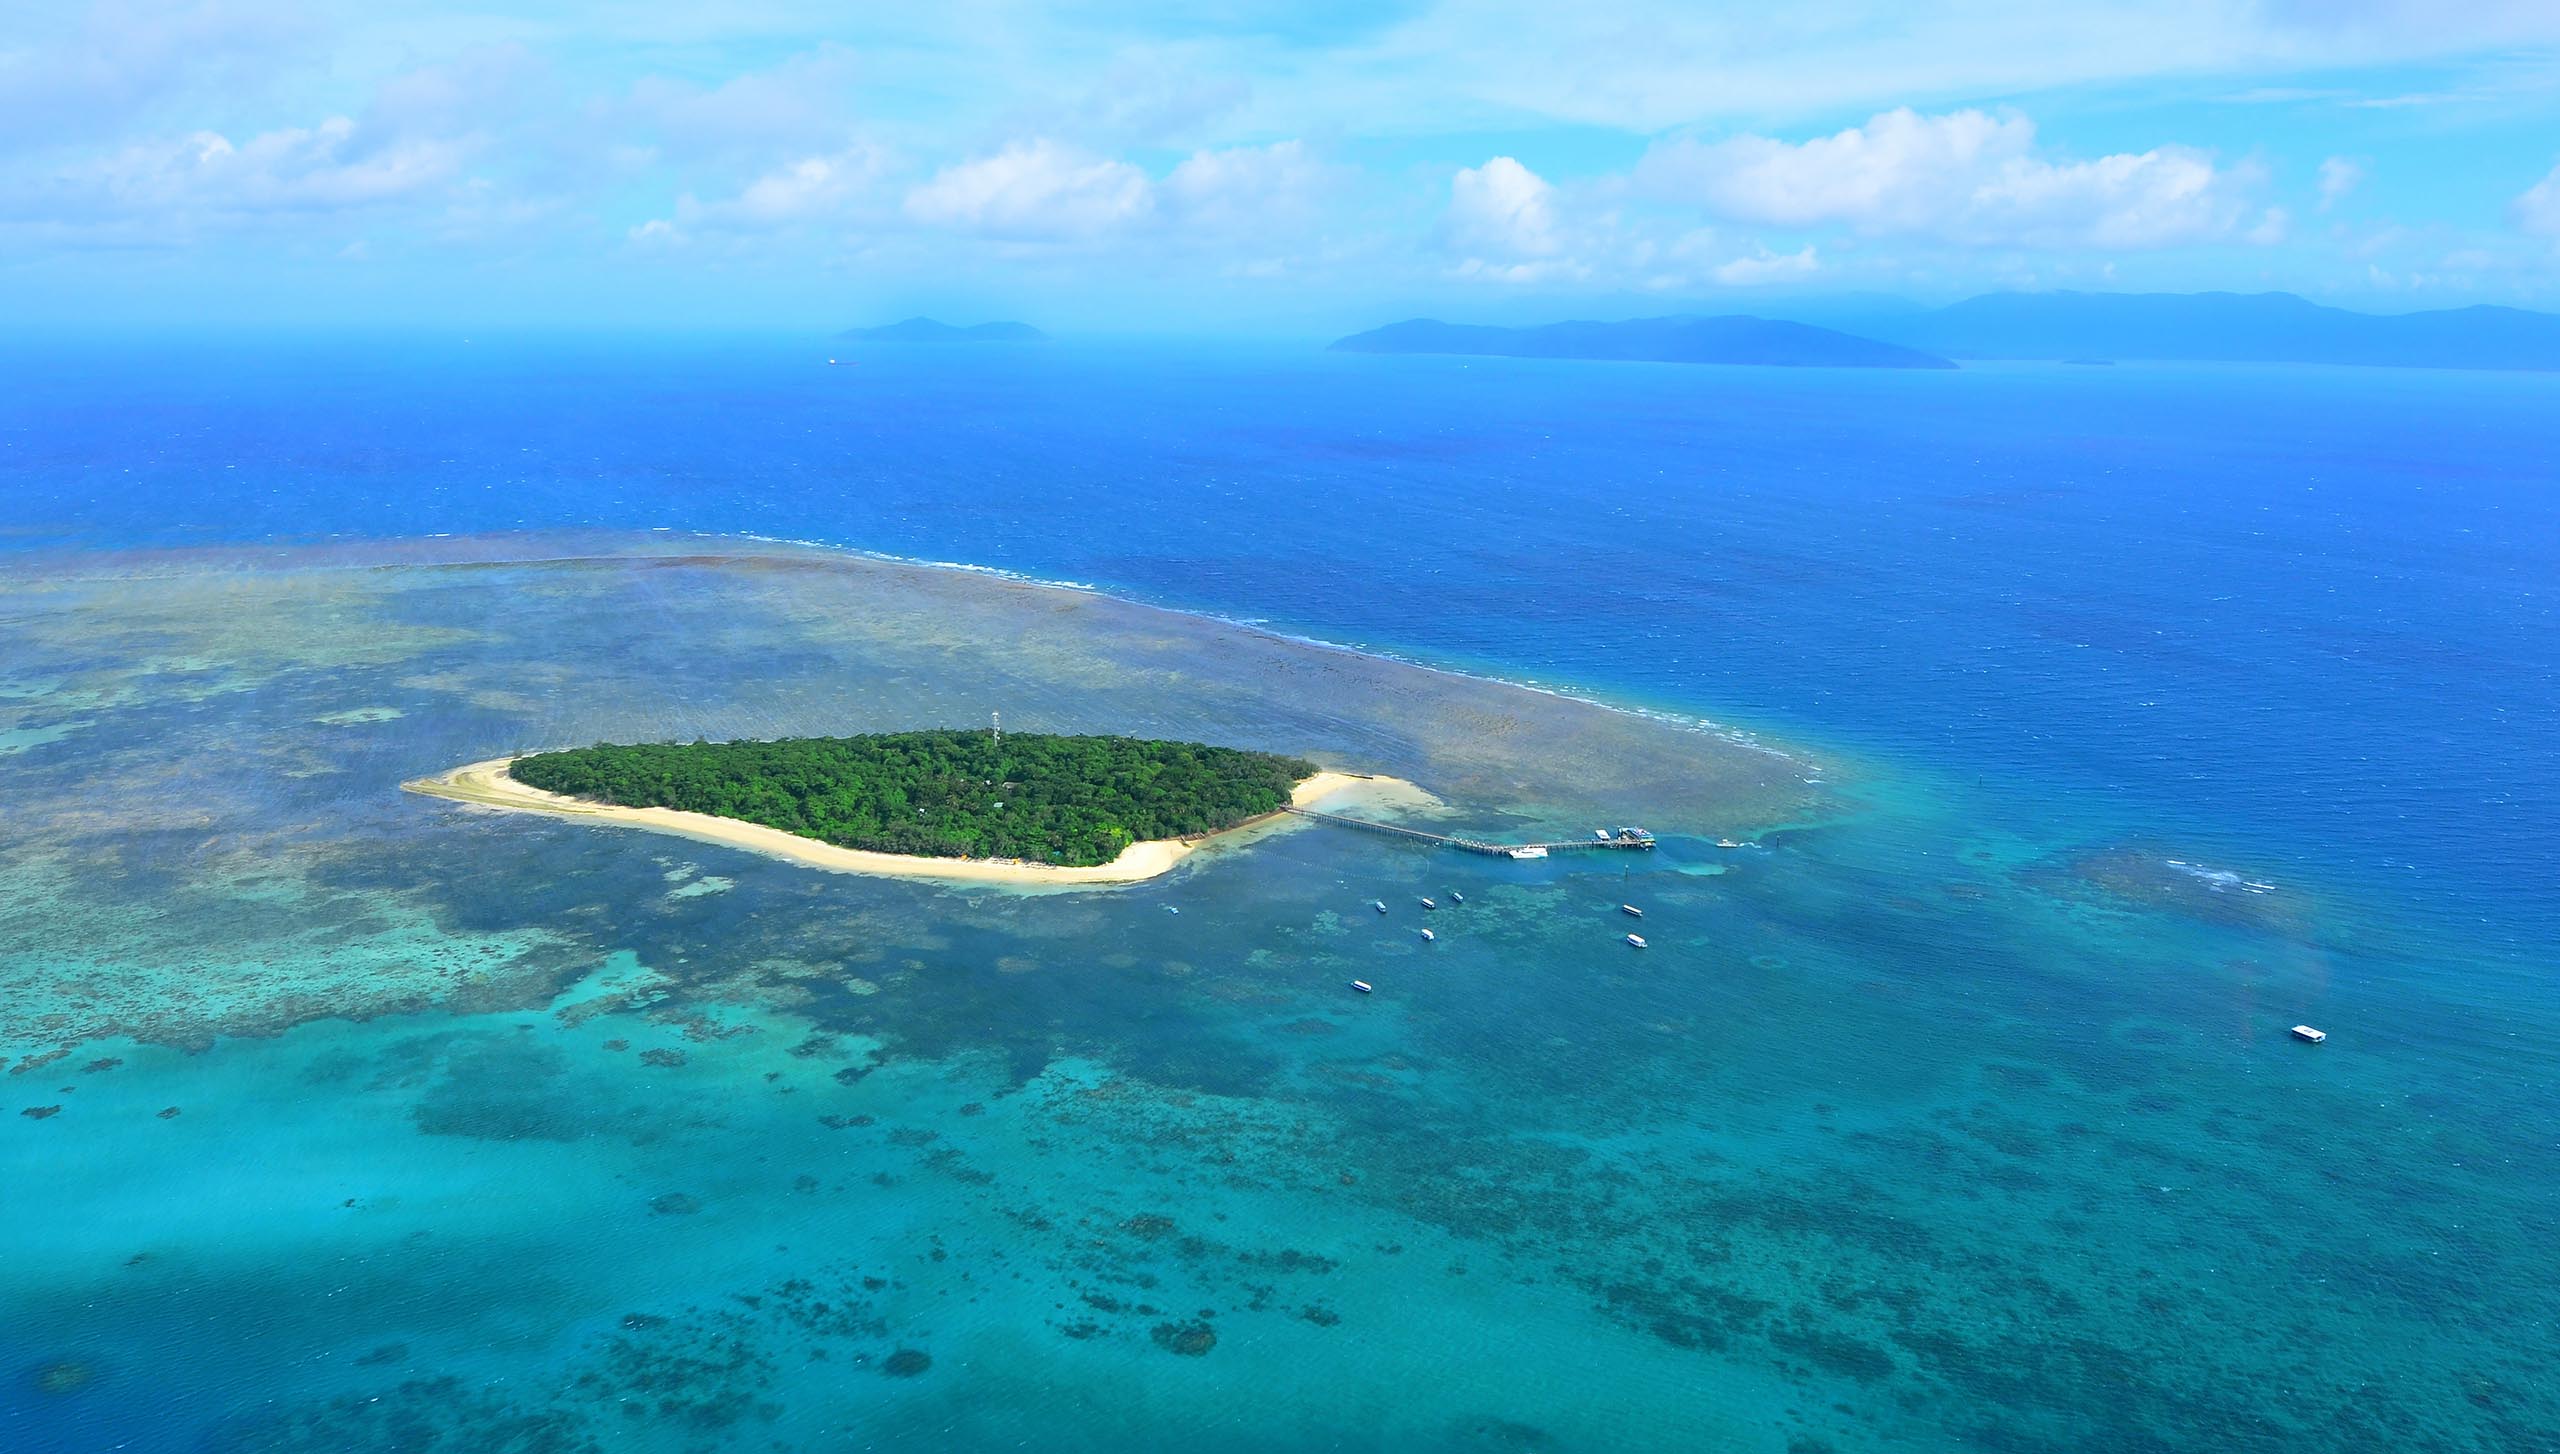 Aerial view of Green Island reef at the Great Barrier Reef near Cairns in Tropical North Queensland, Australia. No people. Copy space